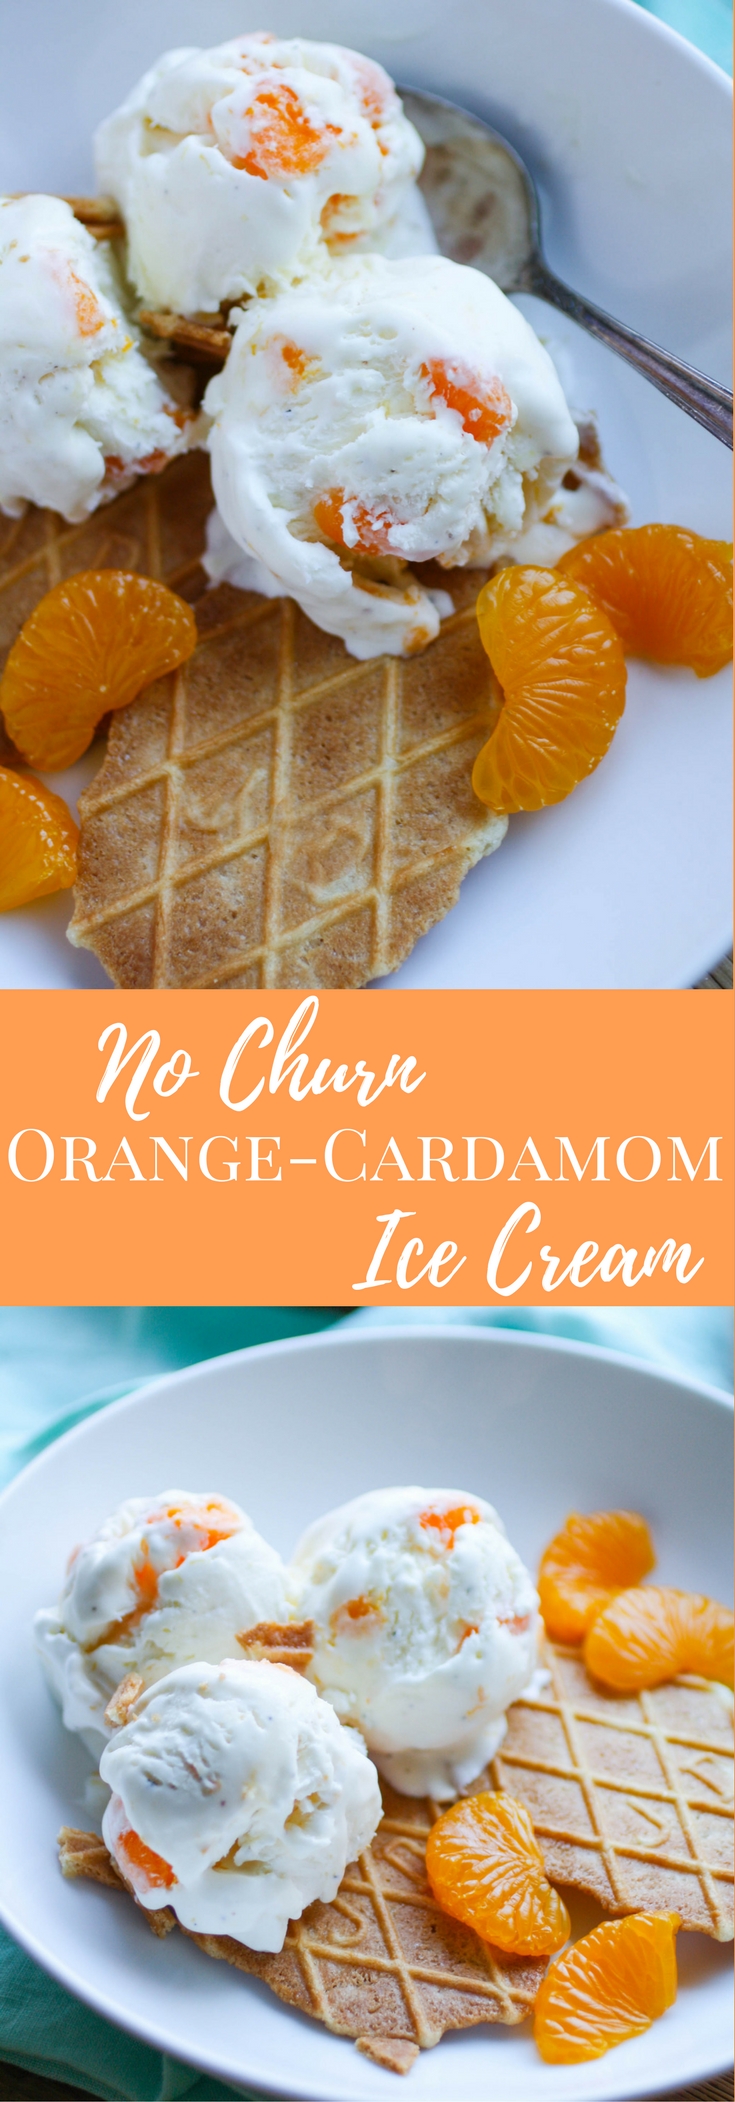 No Churn Orange-Cardamom Ice Cream is a fabulous dessert that's easy to make. You'll love this delicious treat, perfect any time of year!